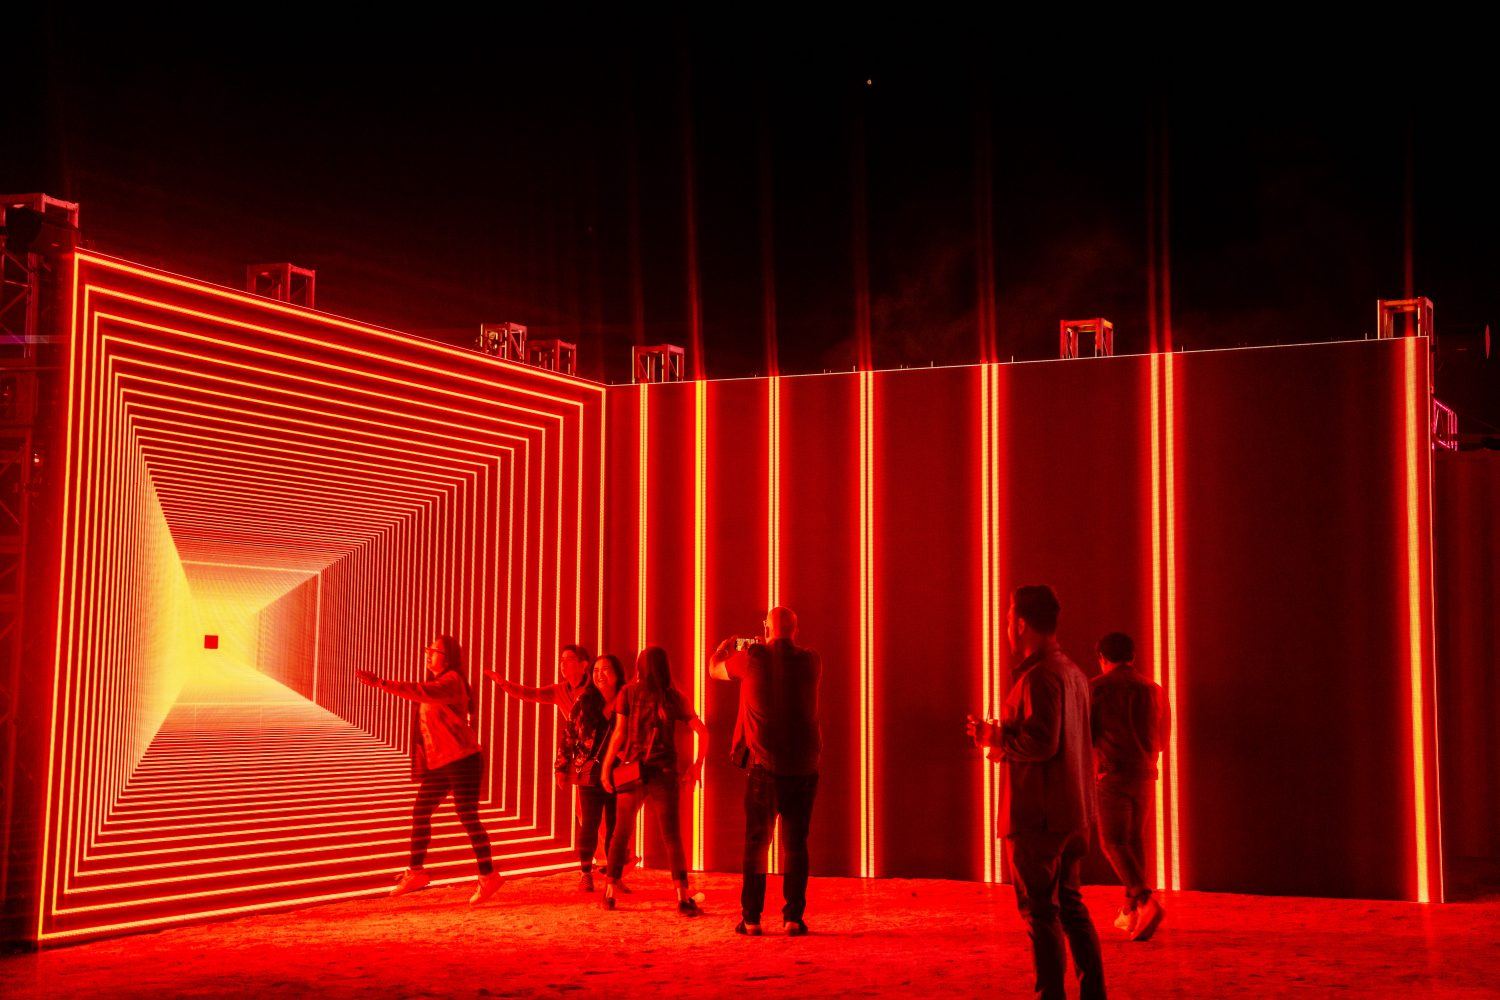 a group of people interacting with a red light art installation